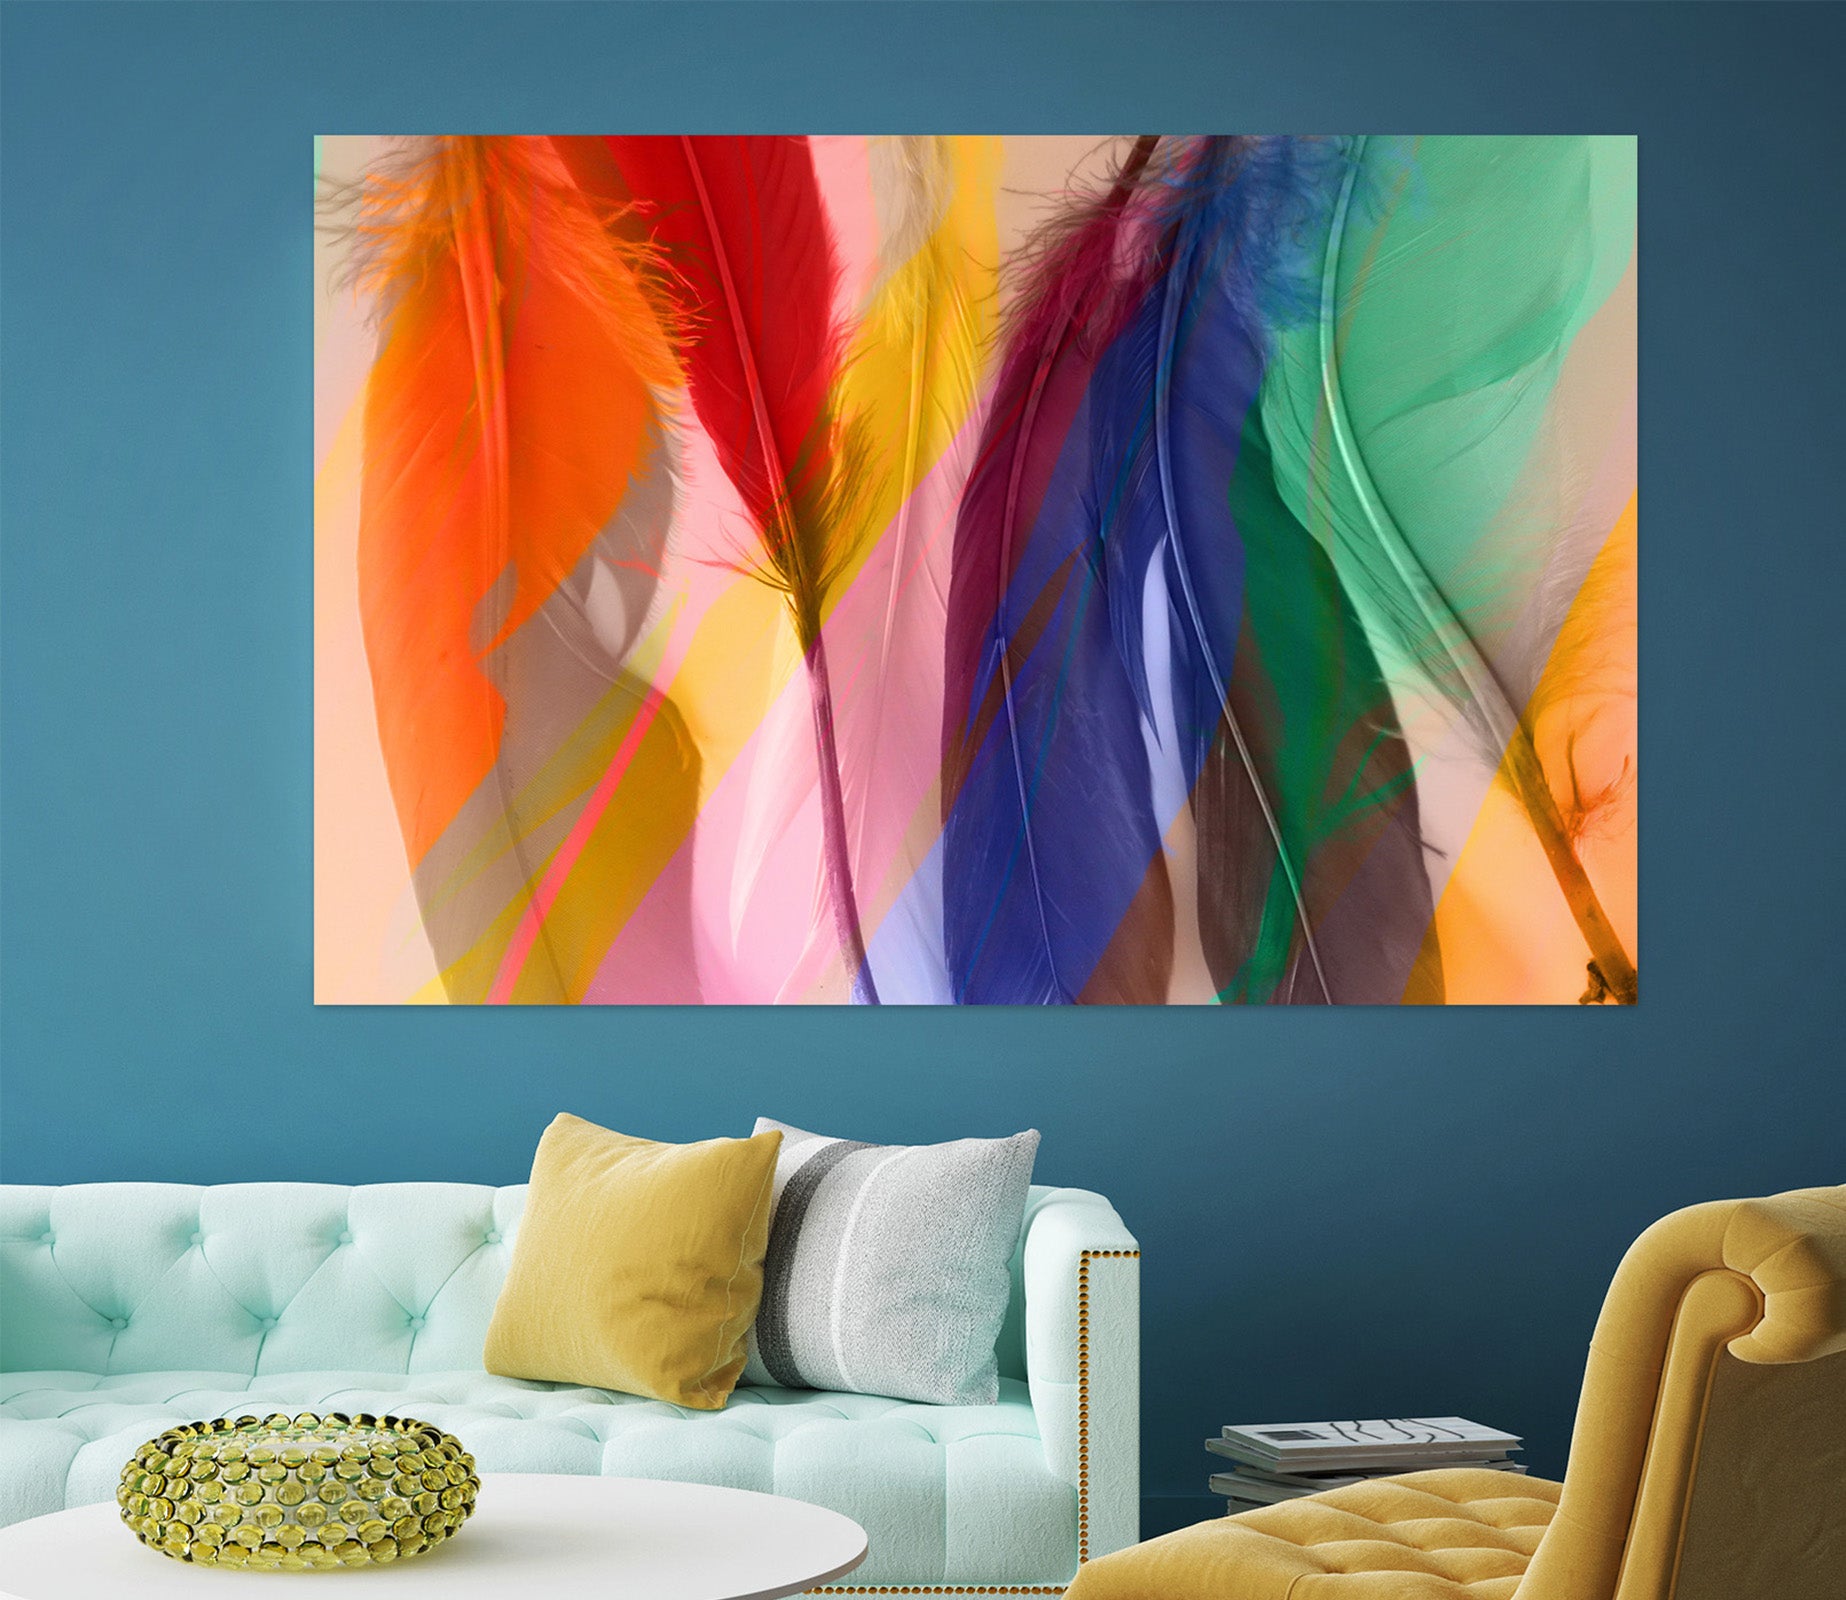 3D Colored Feathers 71113 Shandra Smith Wall Sticker